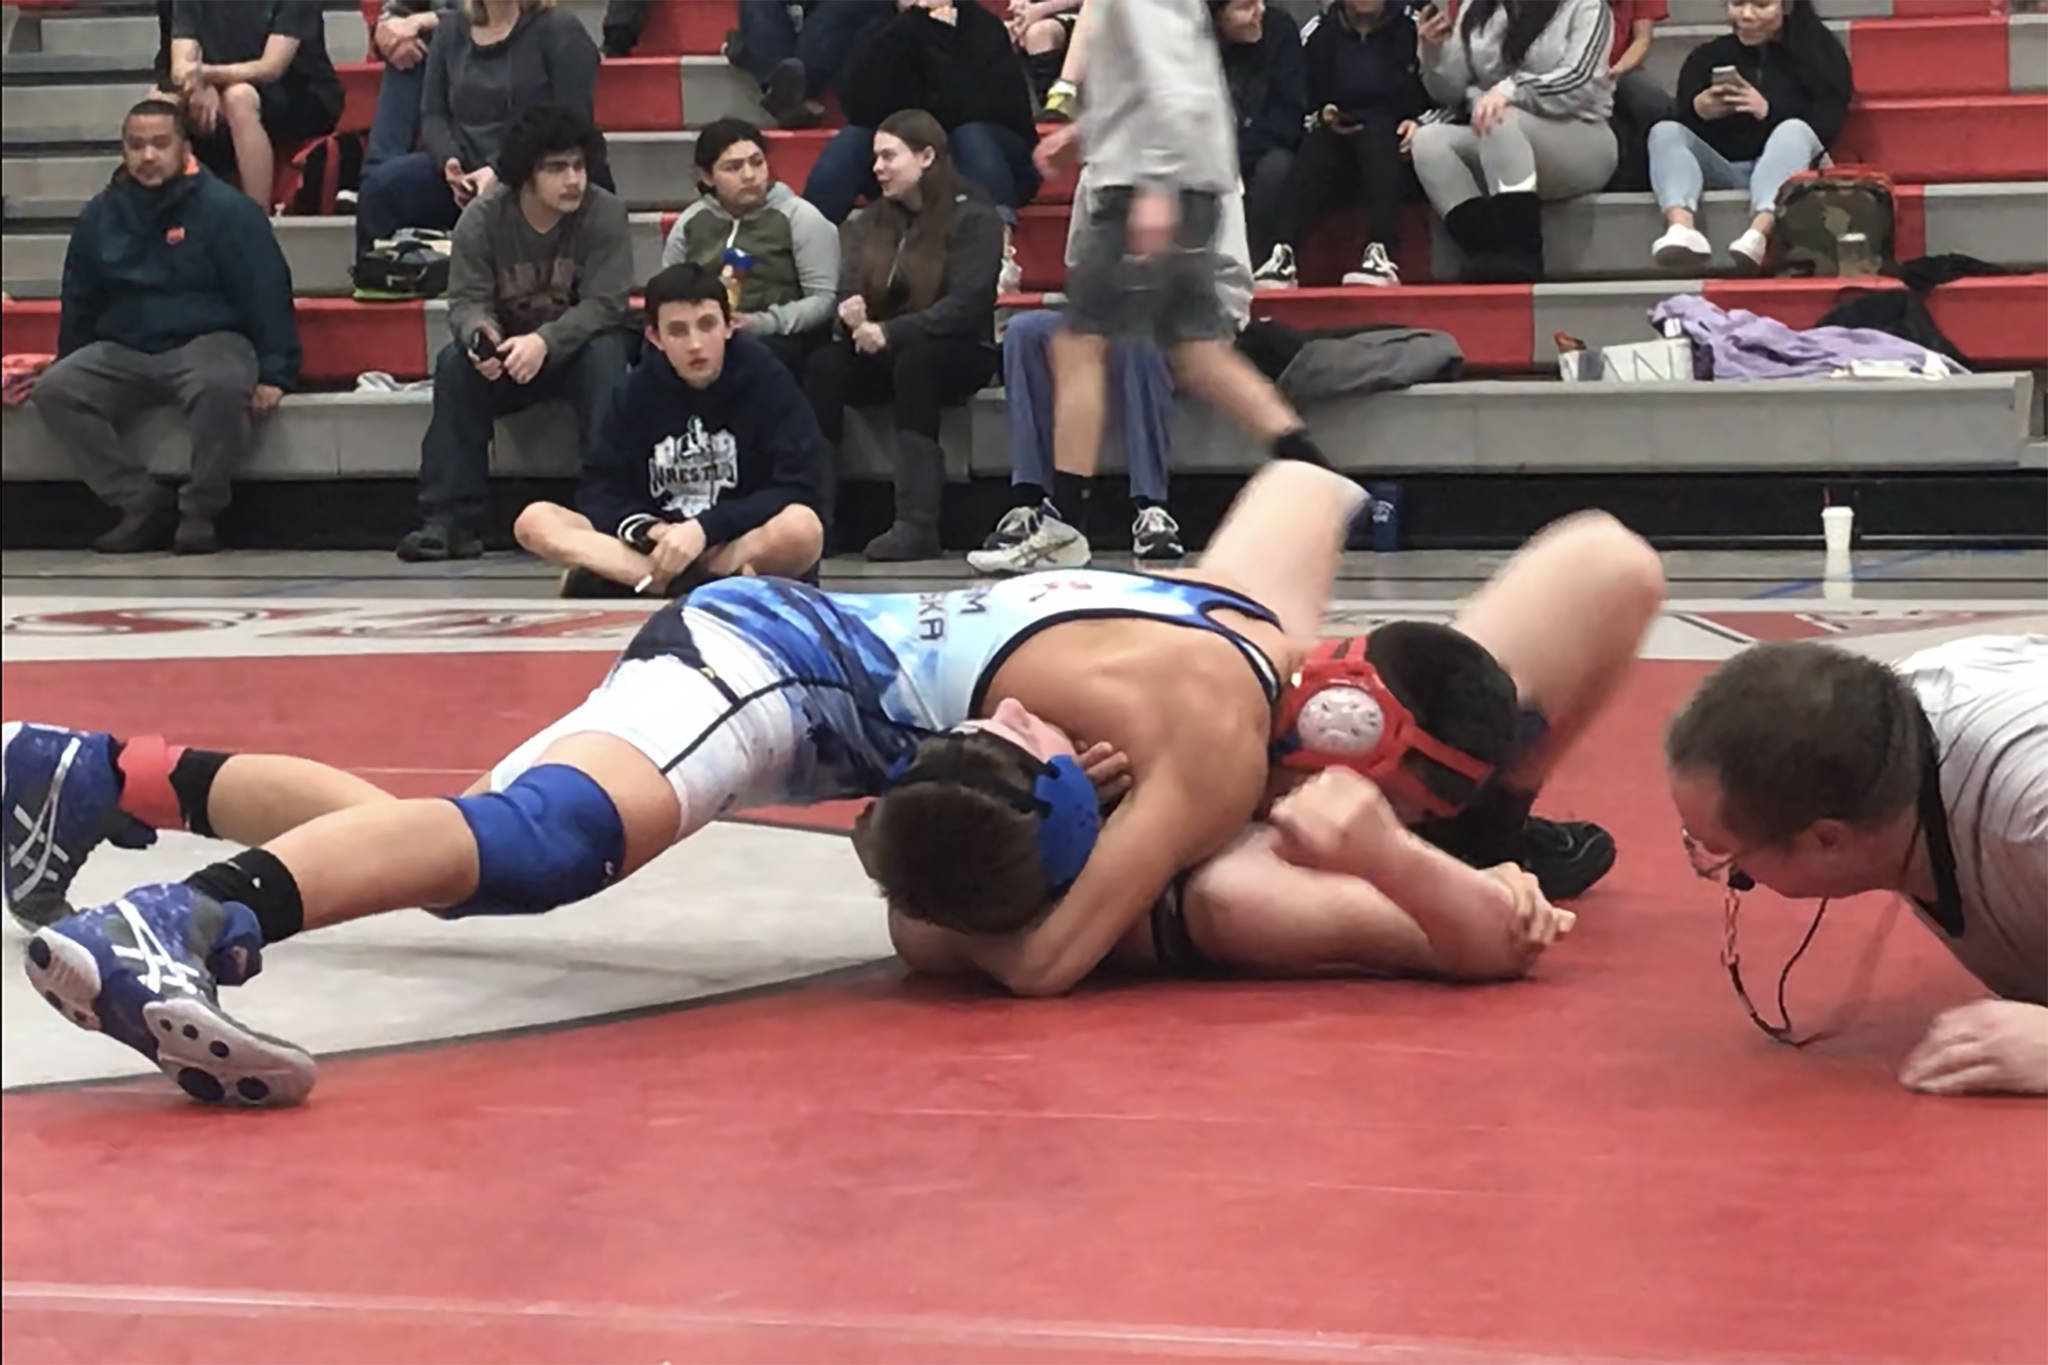 Dzantik’i Heeni Middle School’s Jamal Johnson wrestles in the 140-pound bracket at the Geoff Harben Invitational at FDMS. Johnson defeated Schoenbar Middle School’s Gavin Buendia in the finals to become one of seven Wolverines to reach the top of the podium. (Courtesy Photo | Angela Boyd)